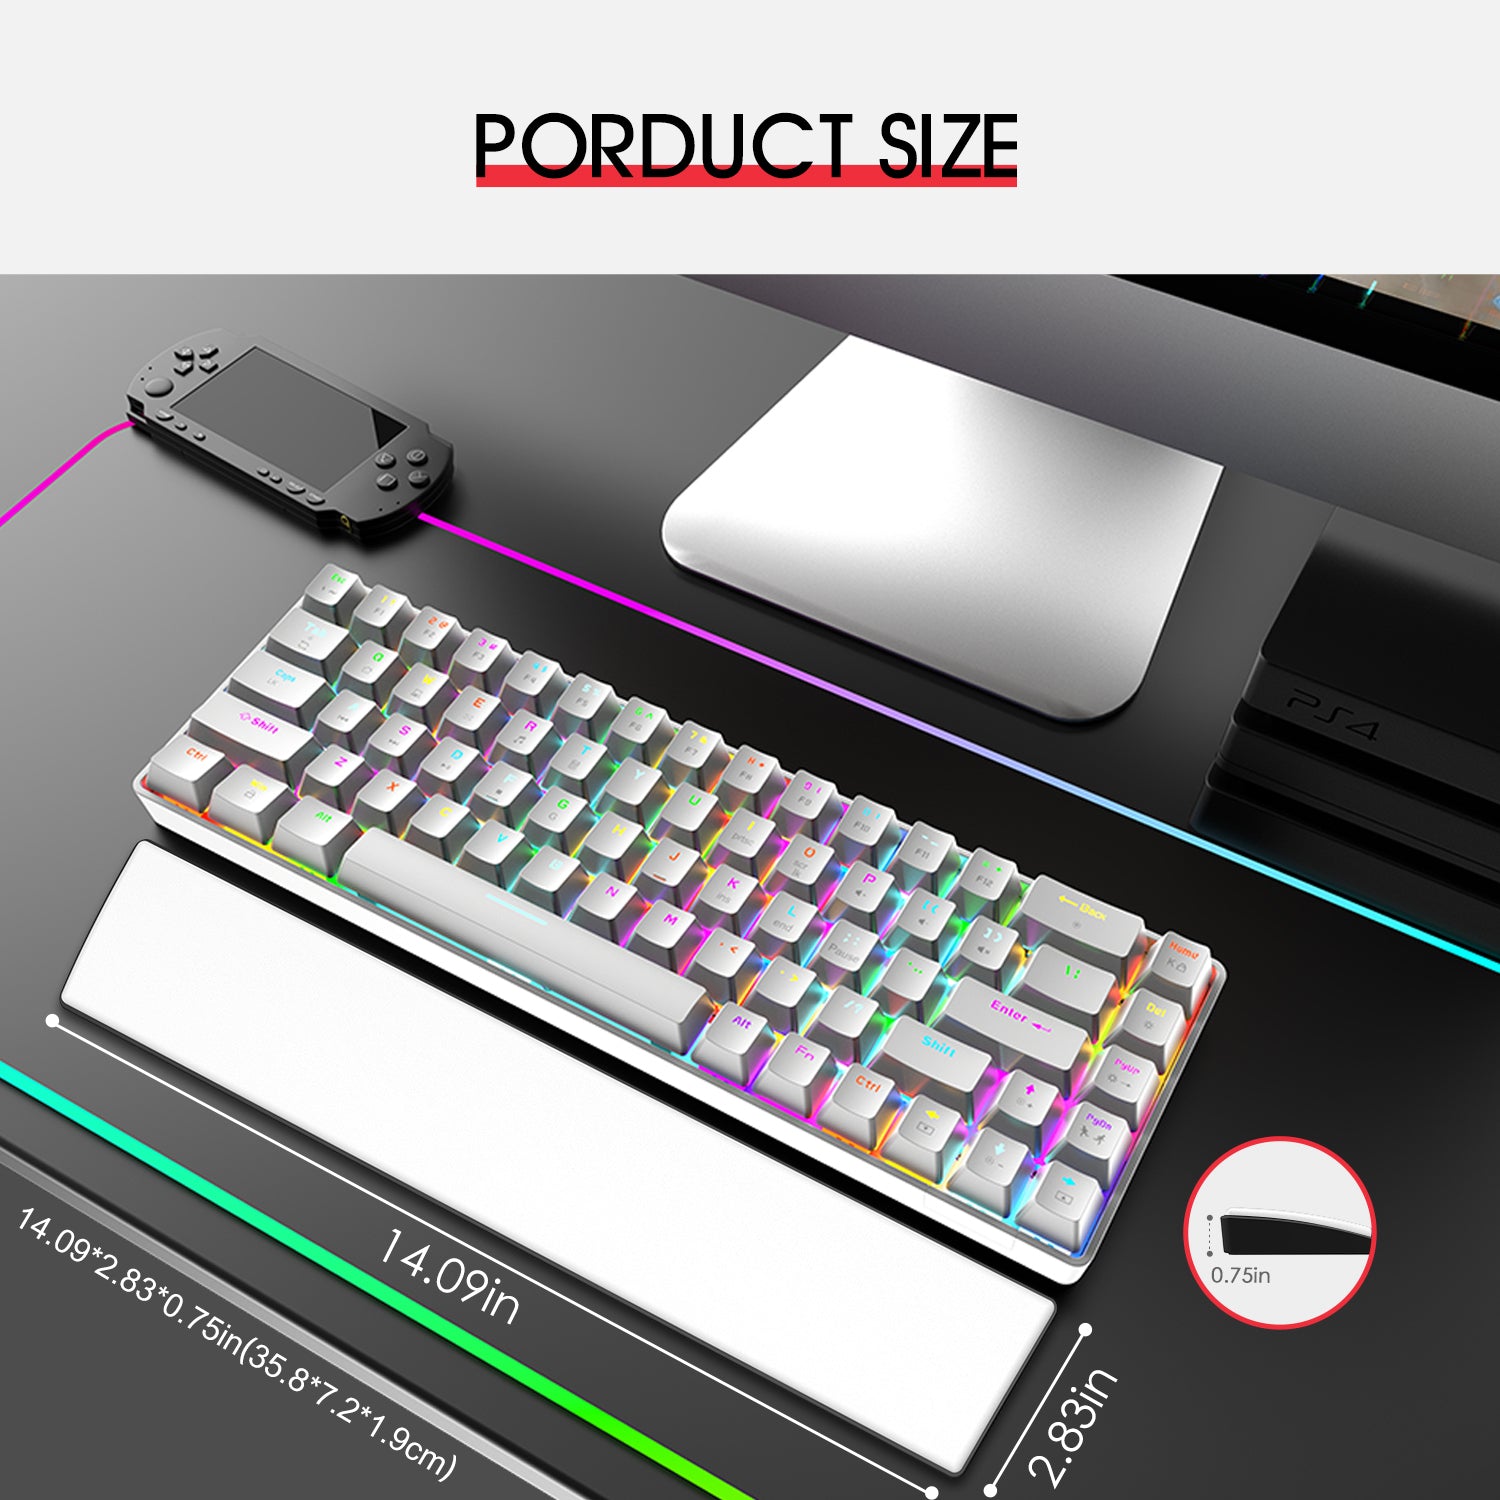 What Is the Purpose of Keyboard Foam? - Glorious Gaming